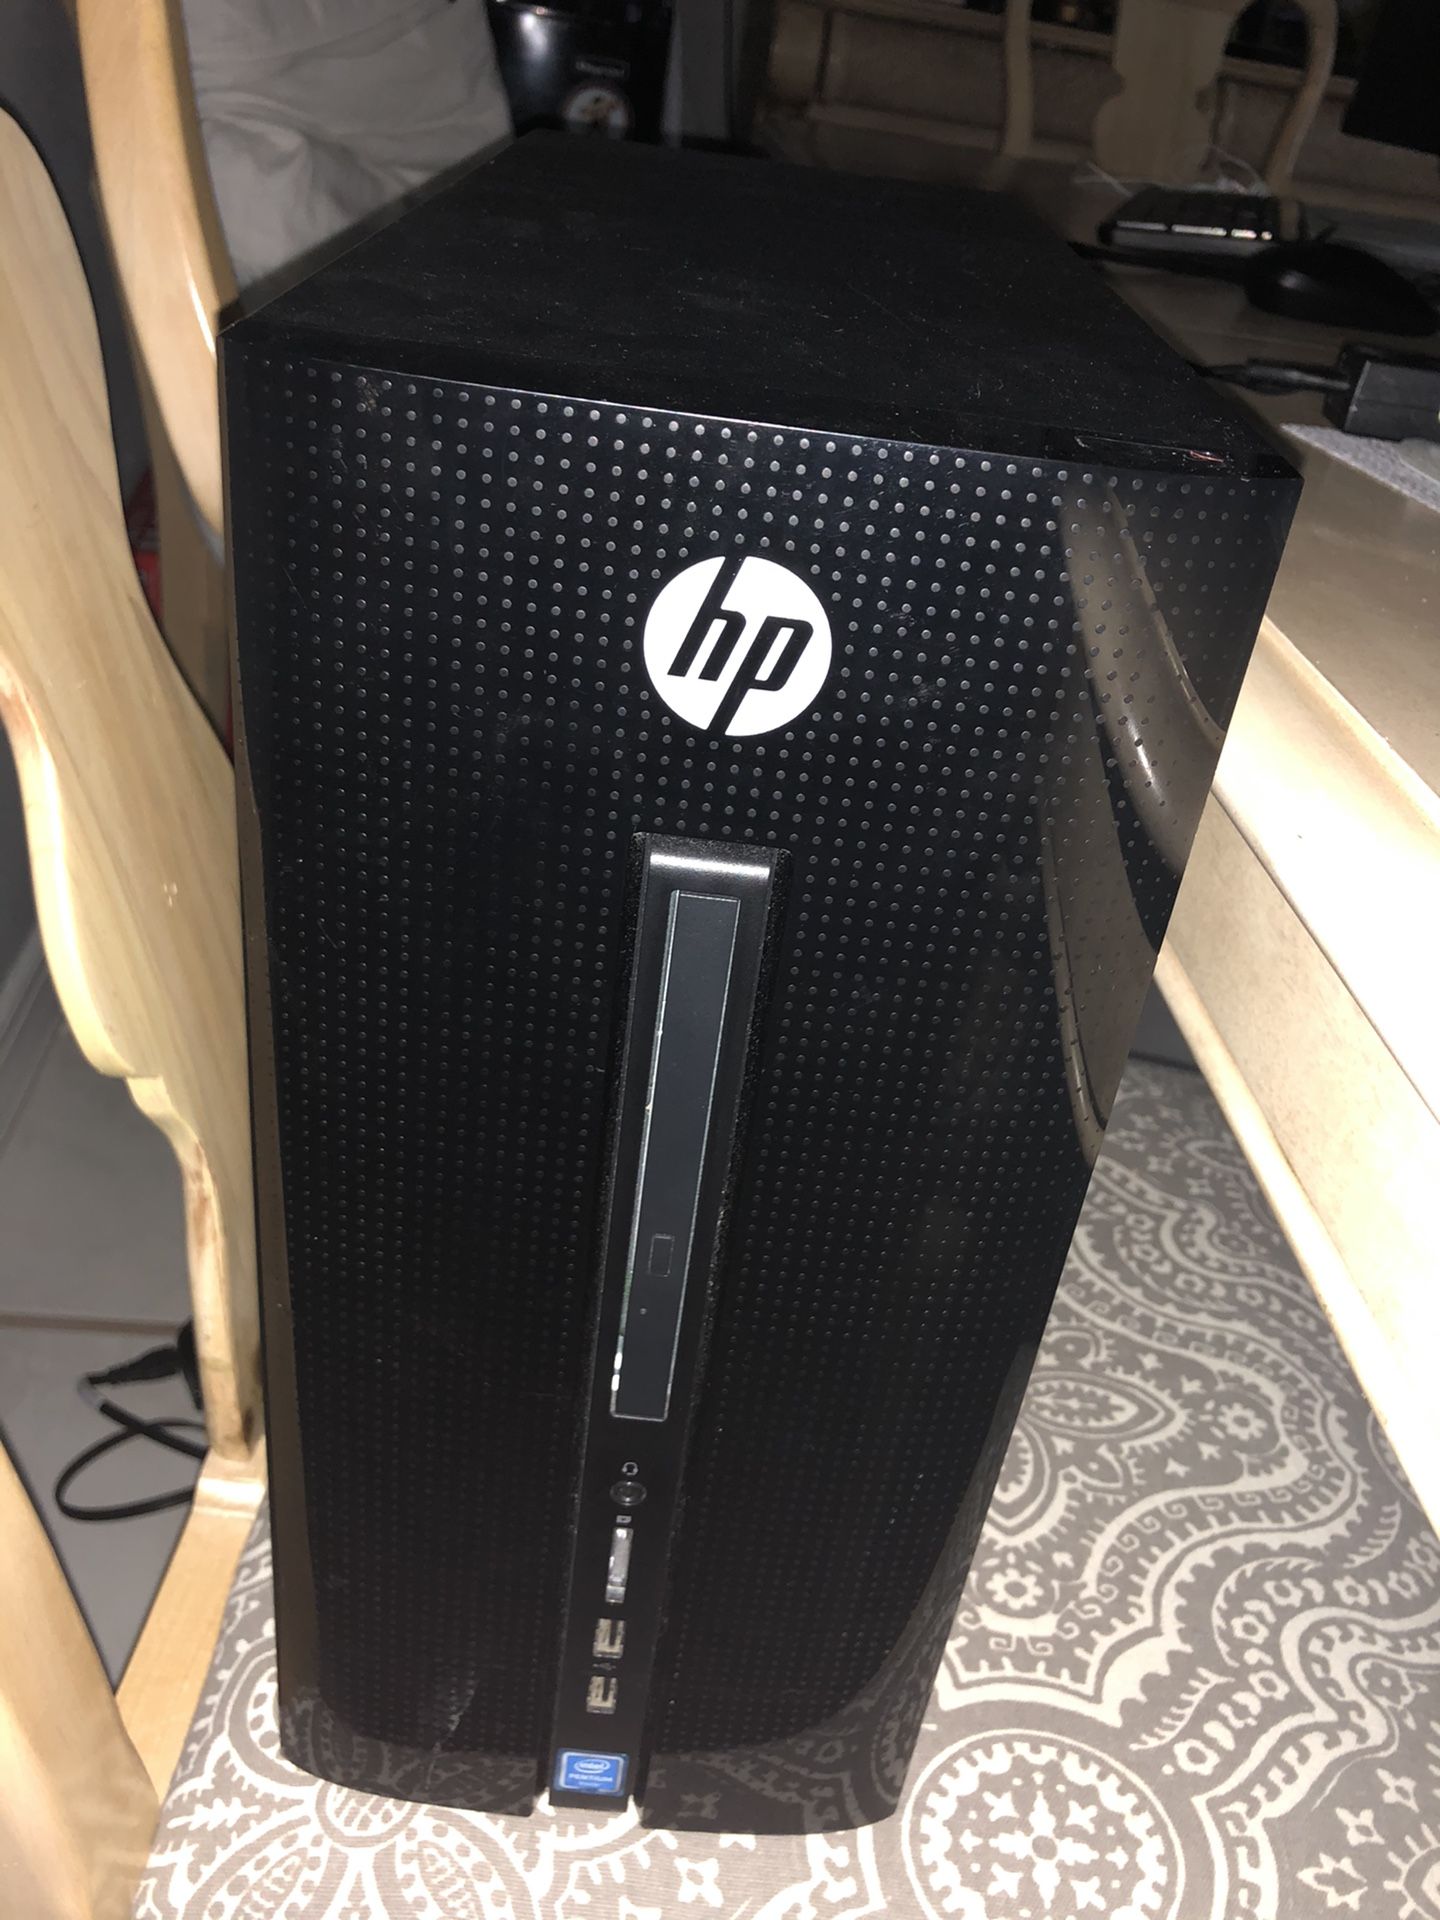 HP Computer with keyboard and mouse